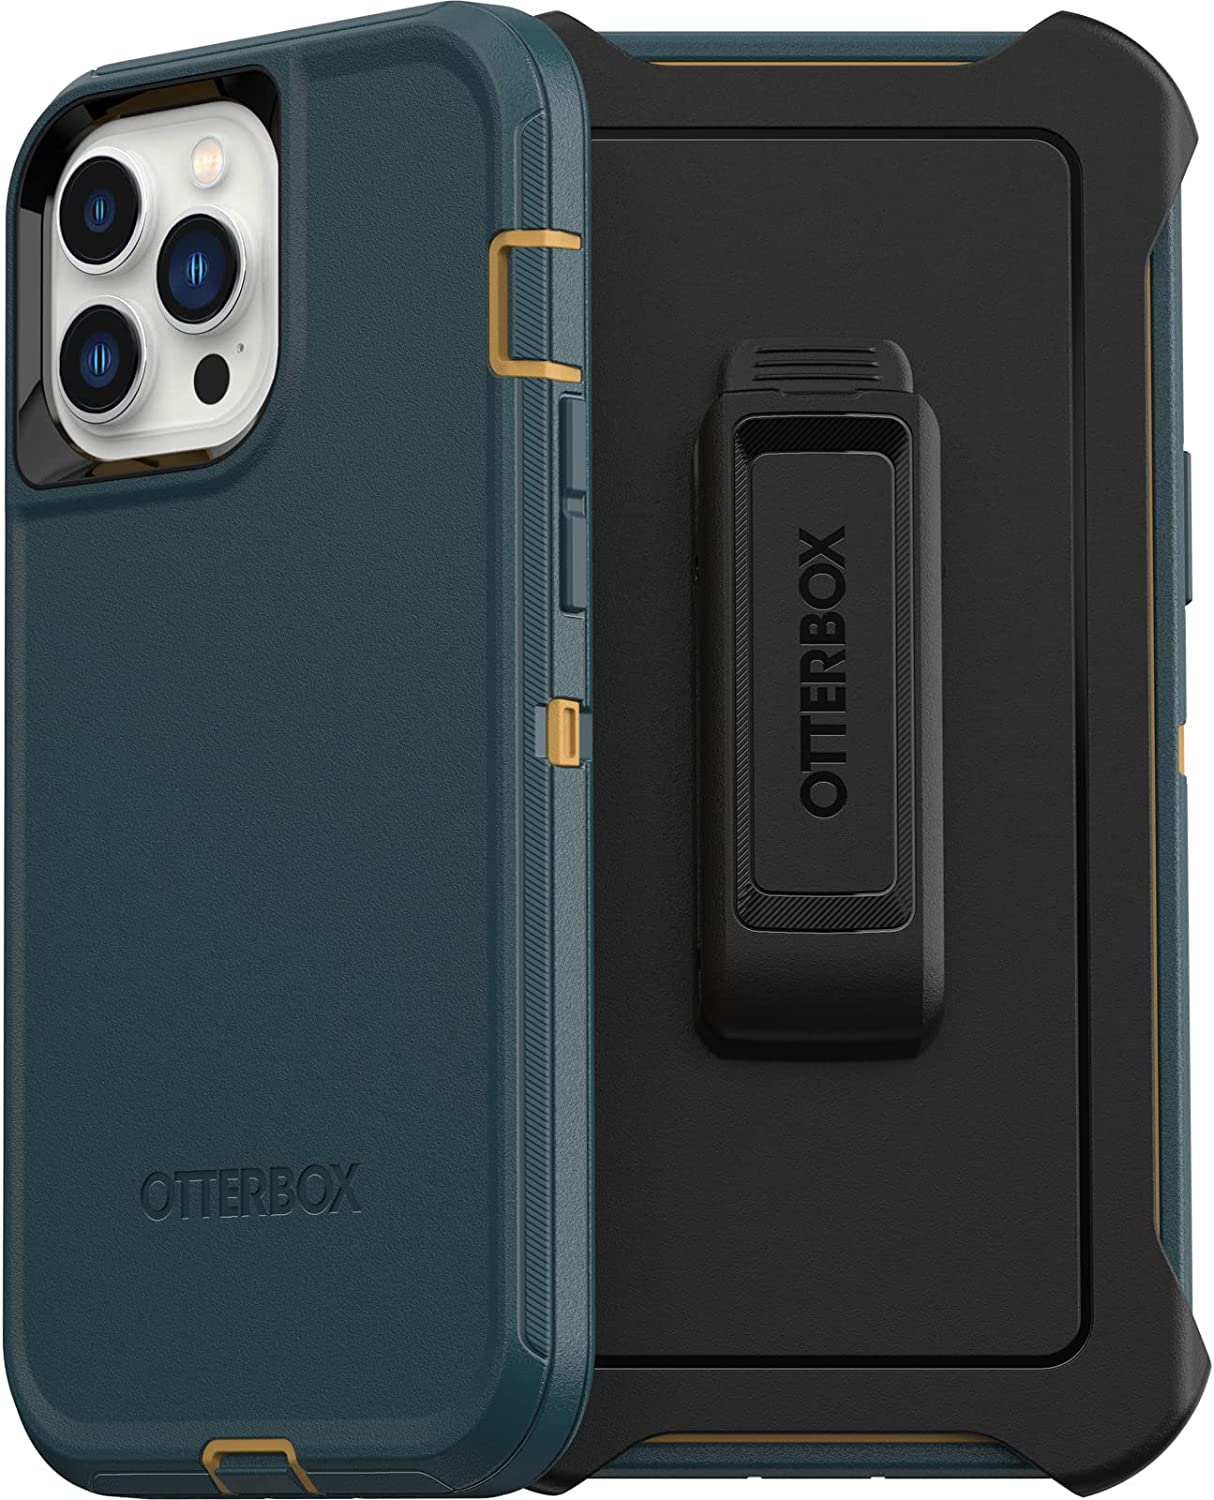 OtterBox DEFENDER SERIES Case for Apple iPhone 13 Pro Max - Hunter Green (New)